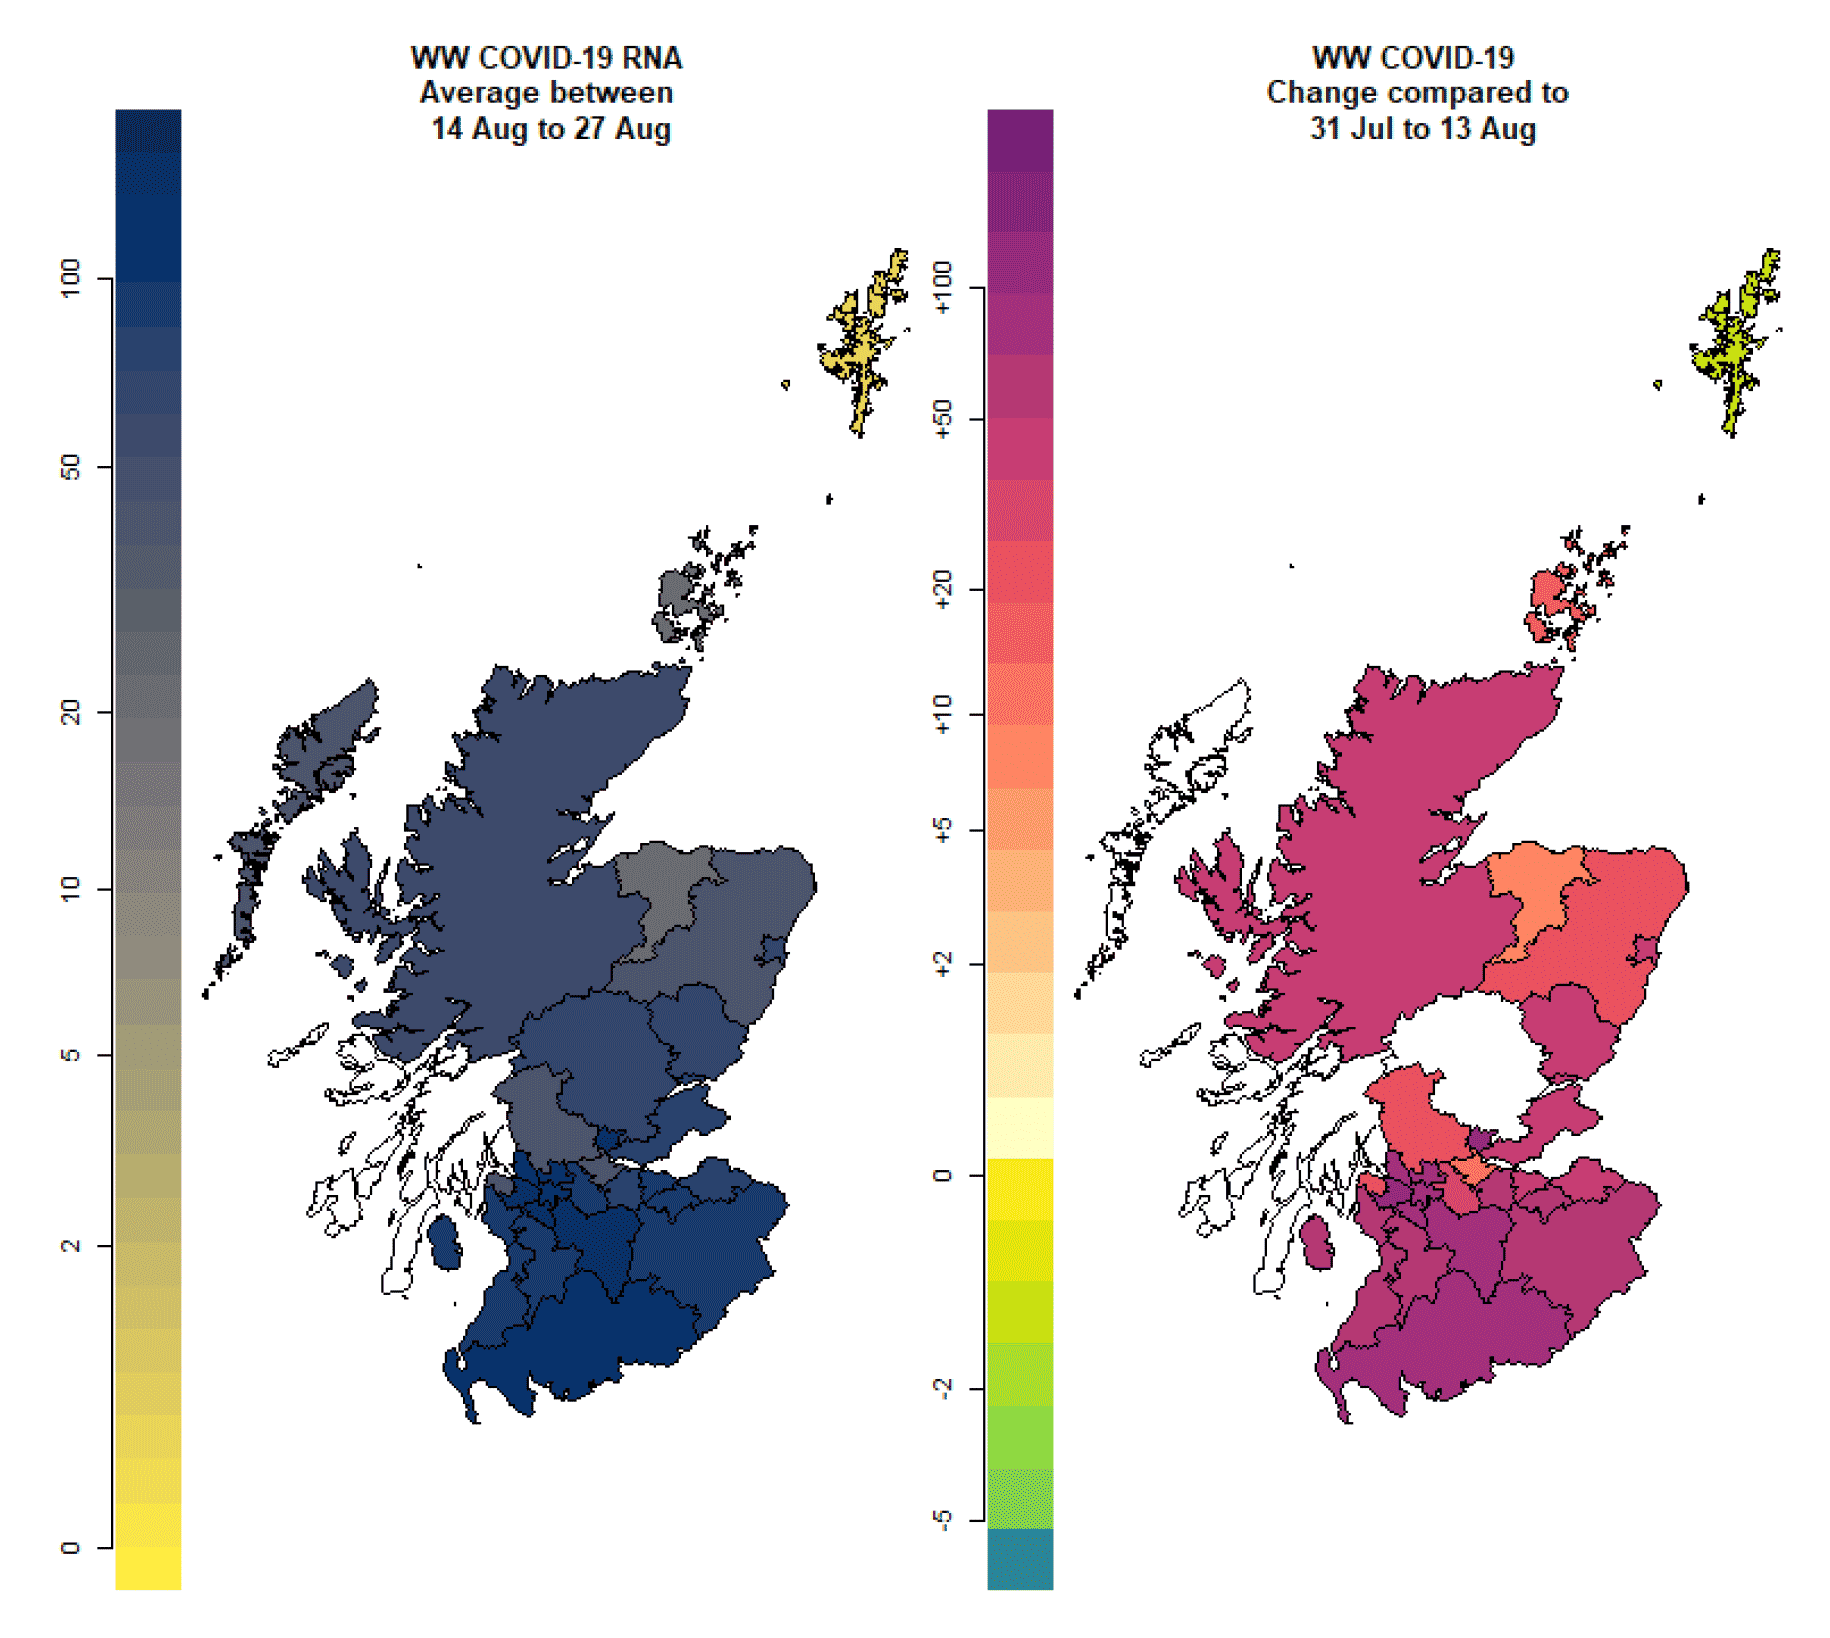 Figure 17. Two maps showing the wastewater Covid-19 levels for each local authority. The first map shows the levels between 14th and 27th August, and the second shows differences from the previous two weeks.